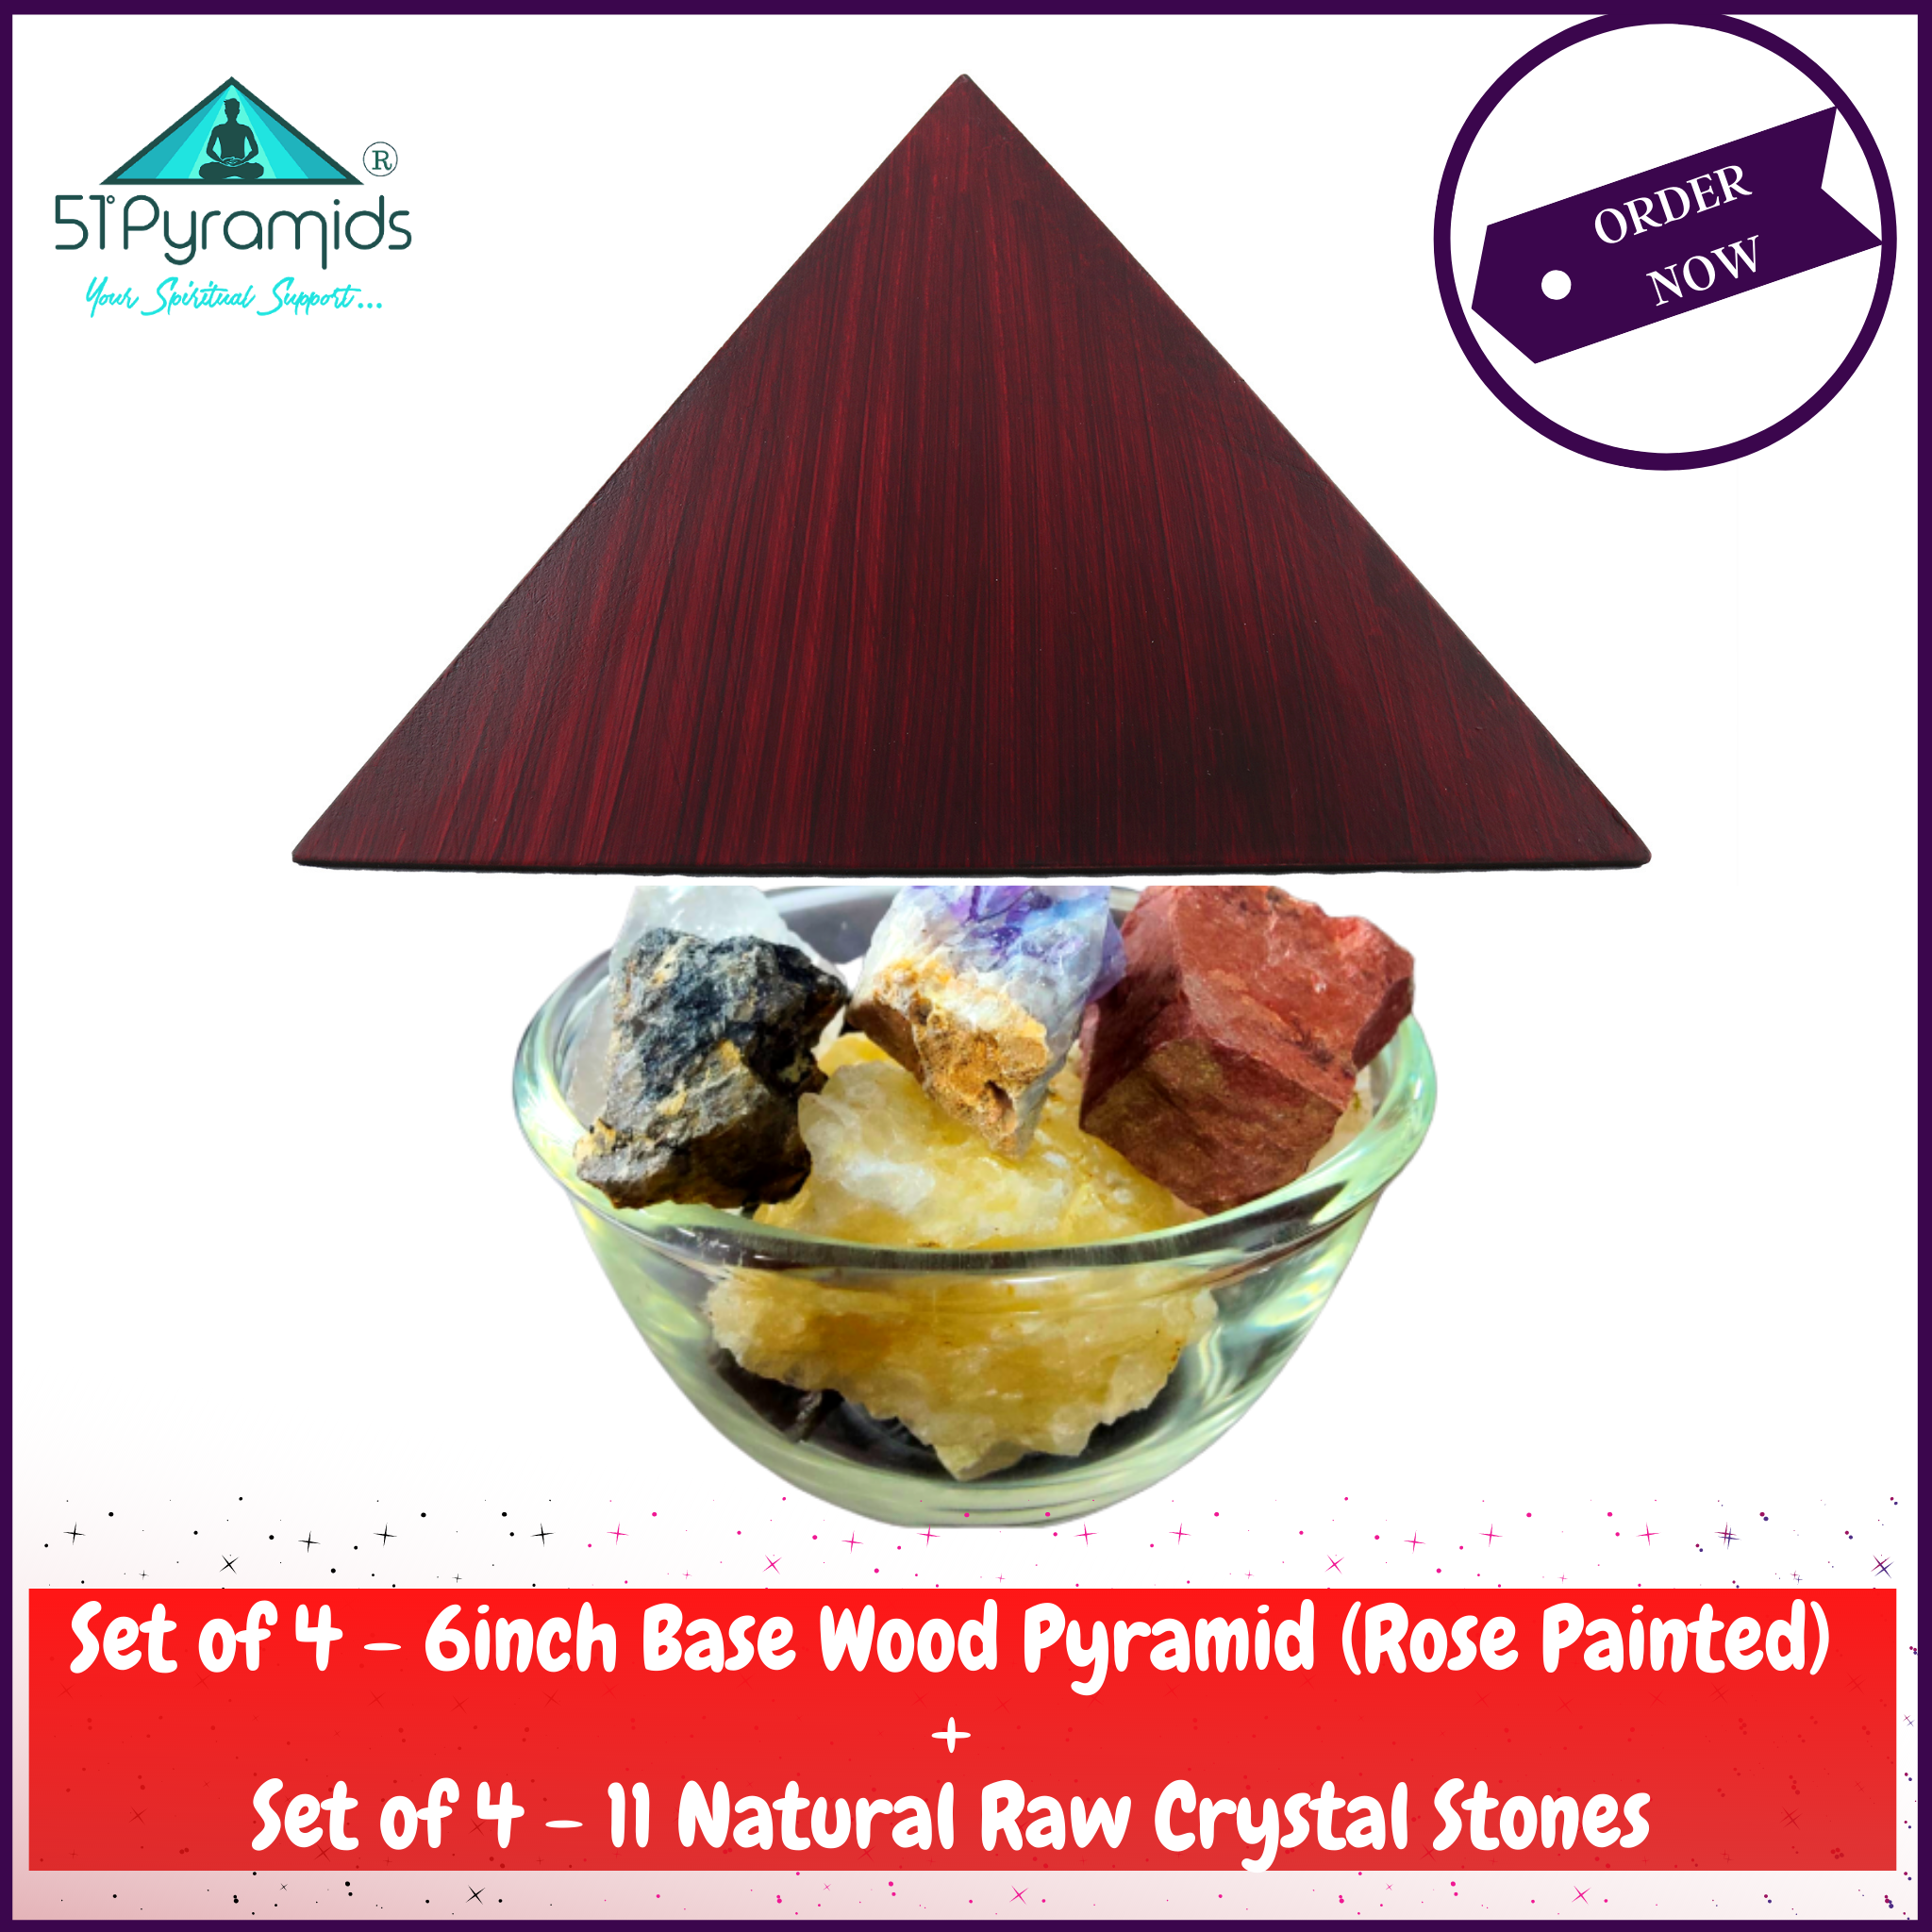 ENERGIZE YOUR HOME with 4 Corner Wood Pyramids (Rose Wood Painted) & 44 Natural Rough Stone Crystals - 51pyramids